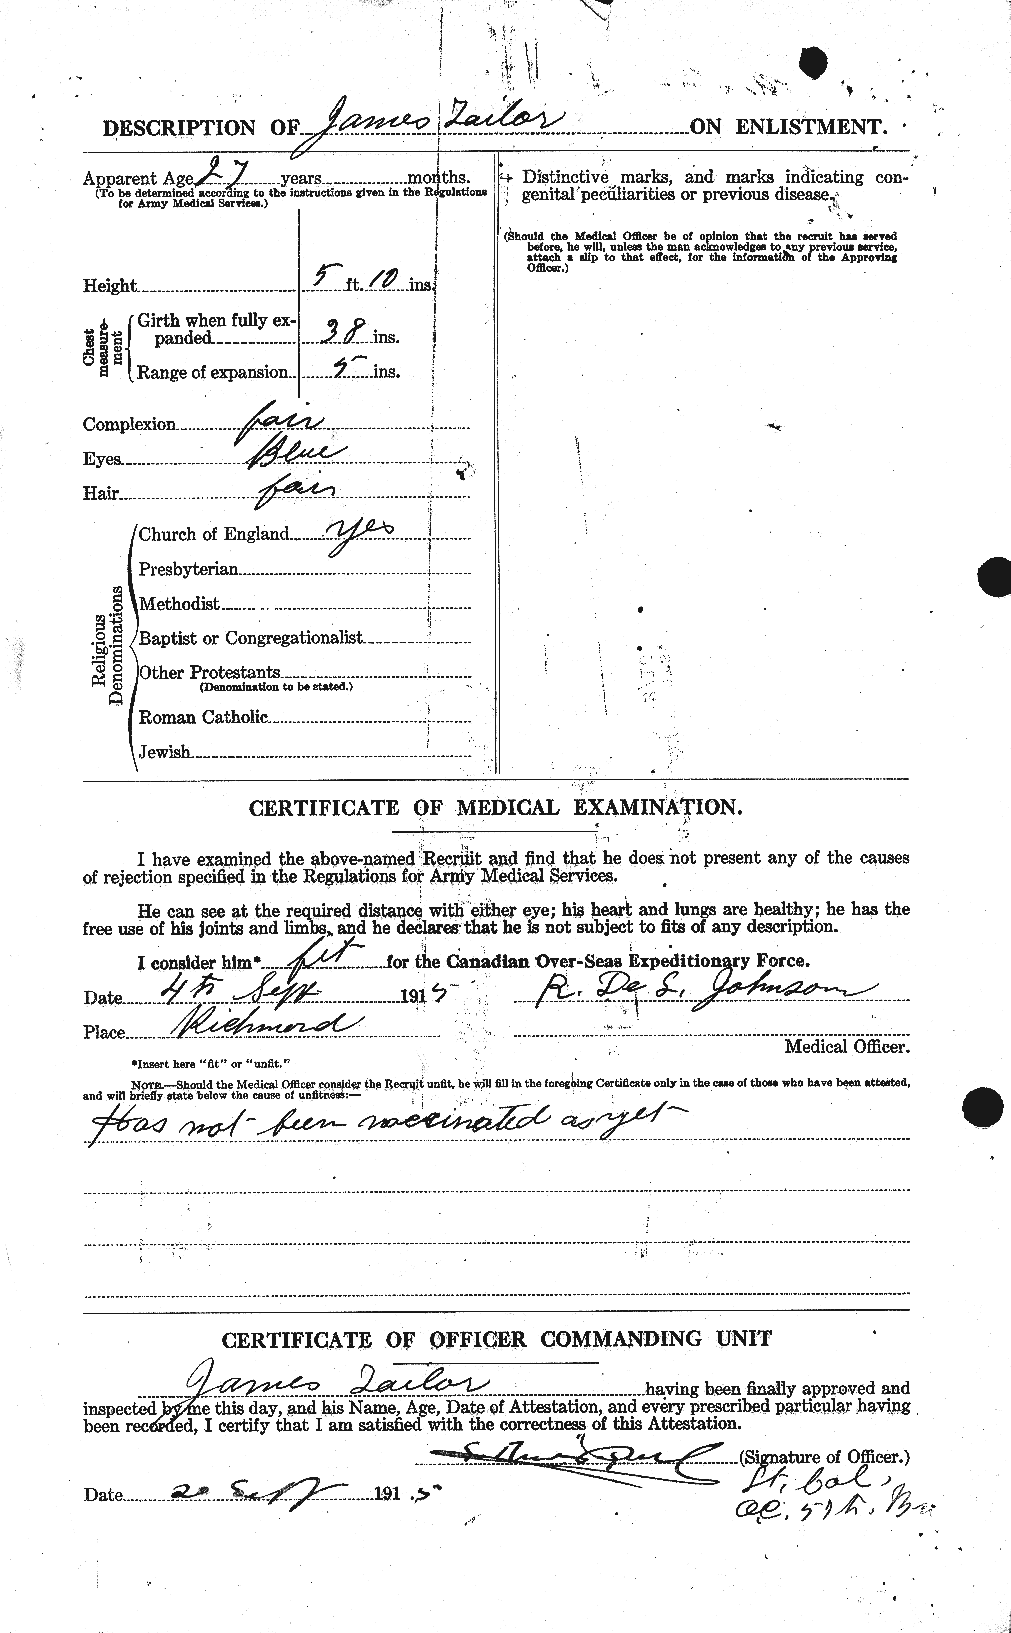 Personnel Records of the First World War - CEF 127181b